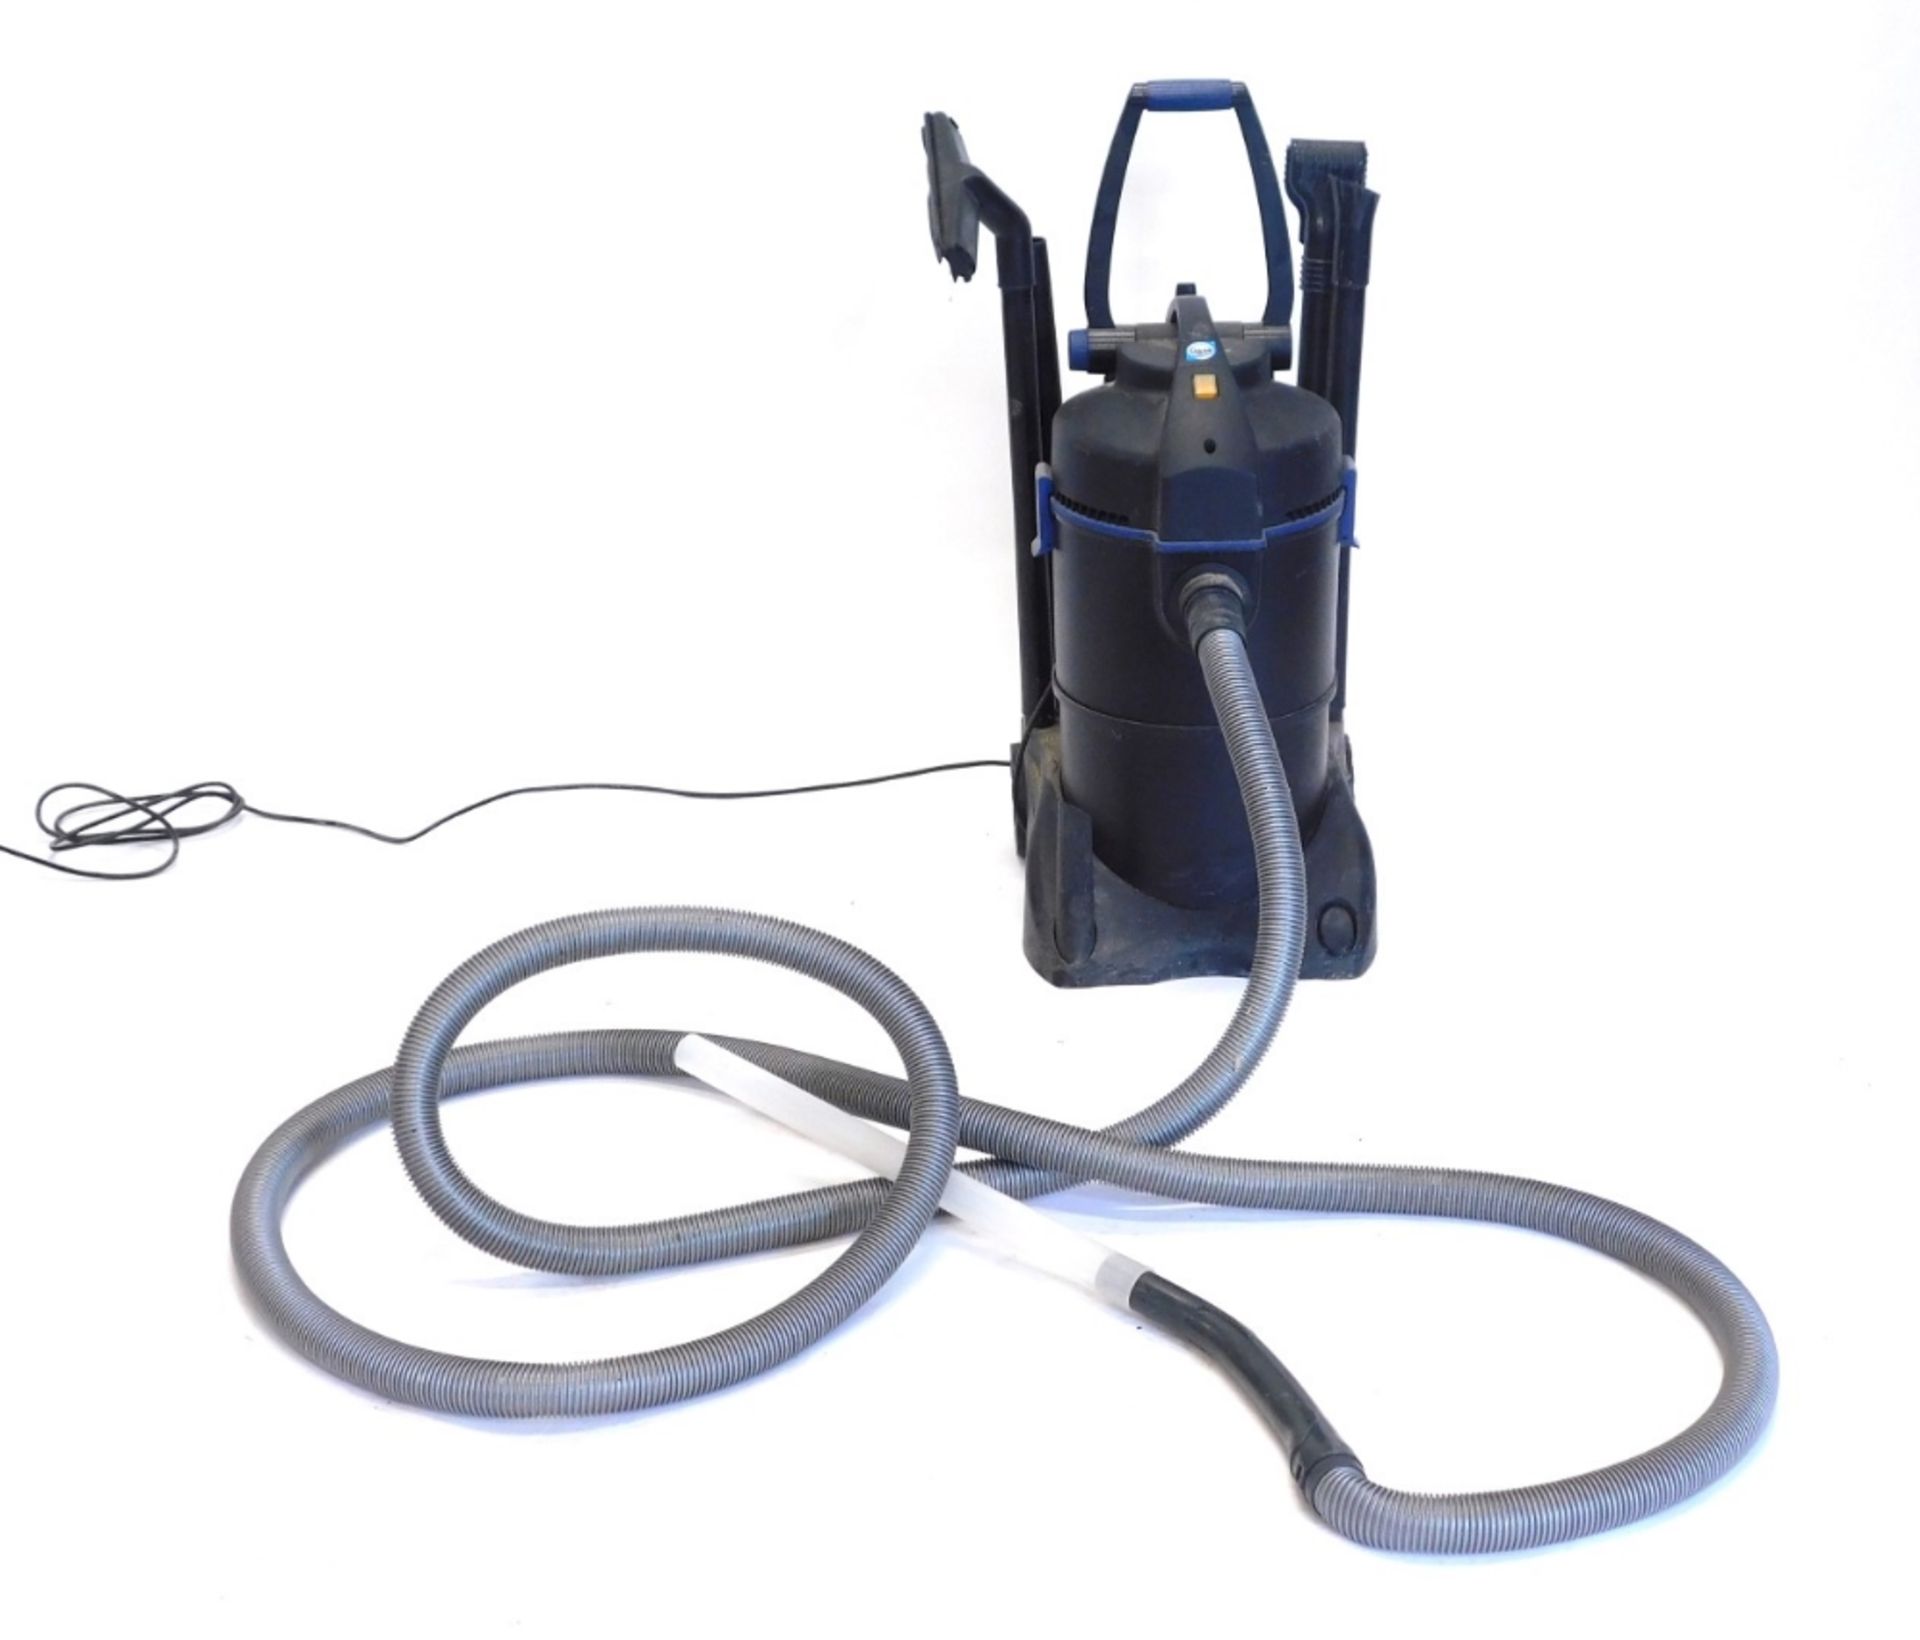 An Oase industrial pond vacuum cleaner, with accessories, 92cm high.